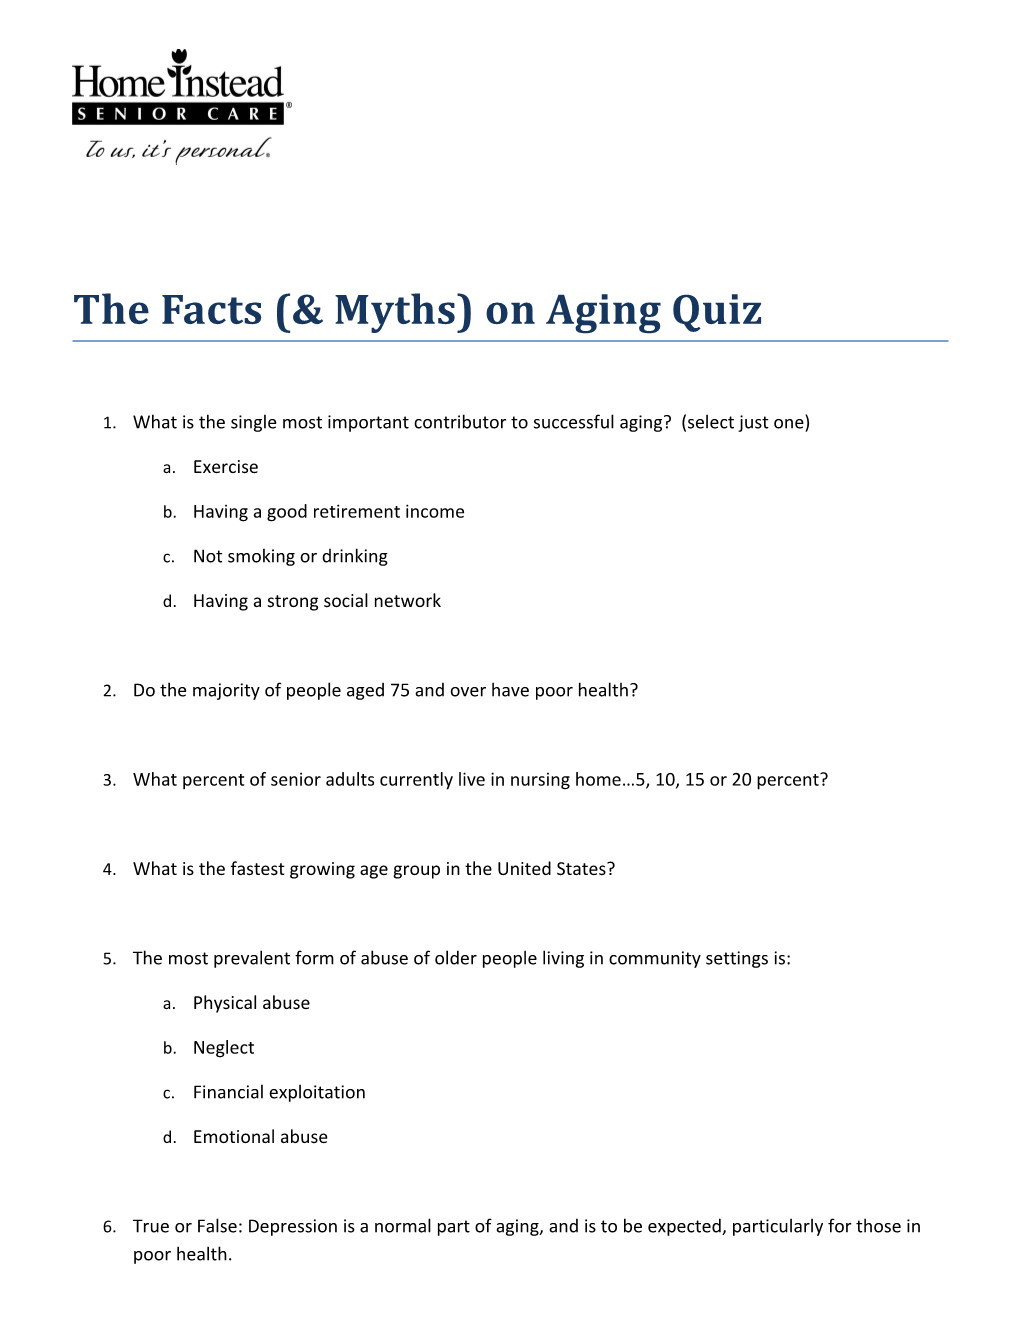 The Facts (& Myths) on Aging Quiz